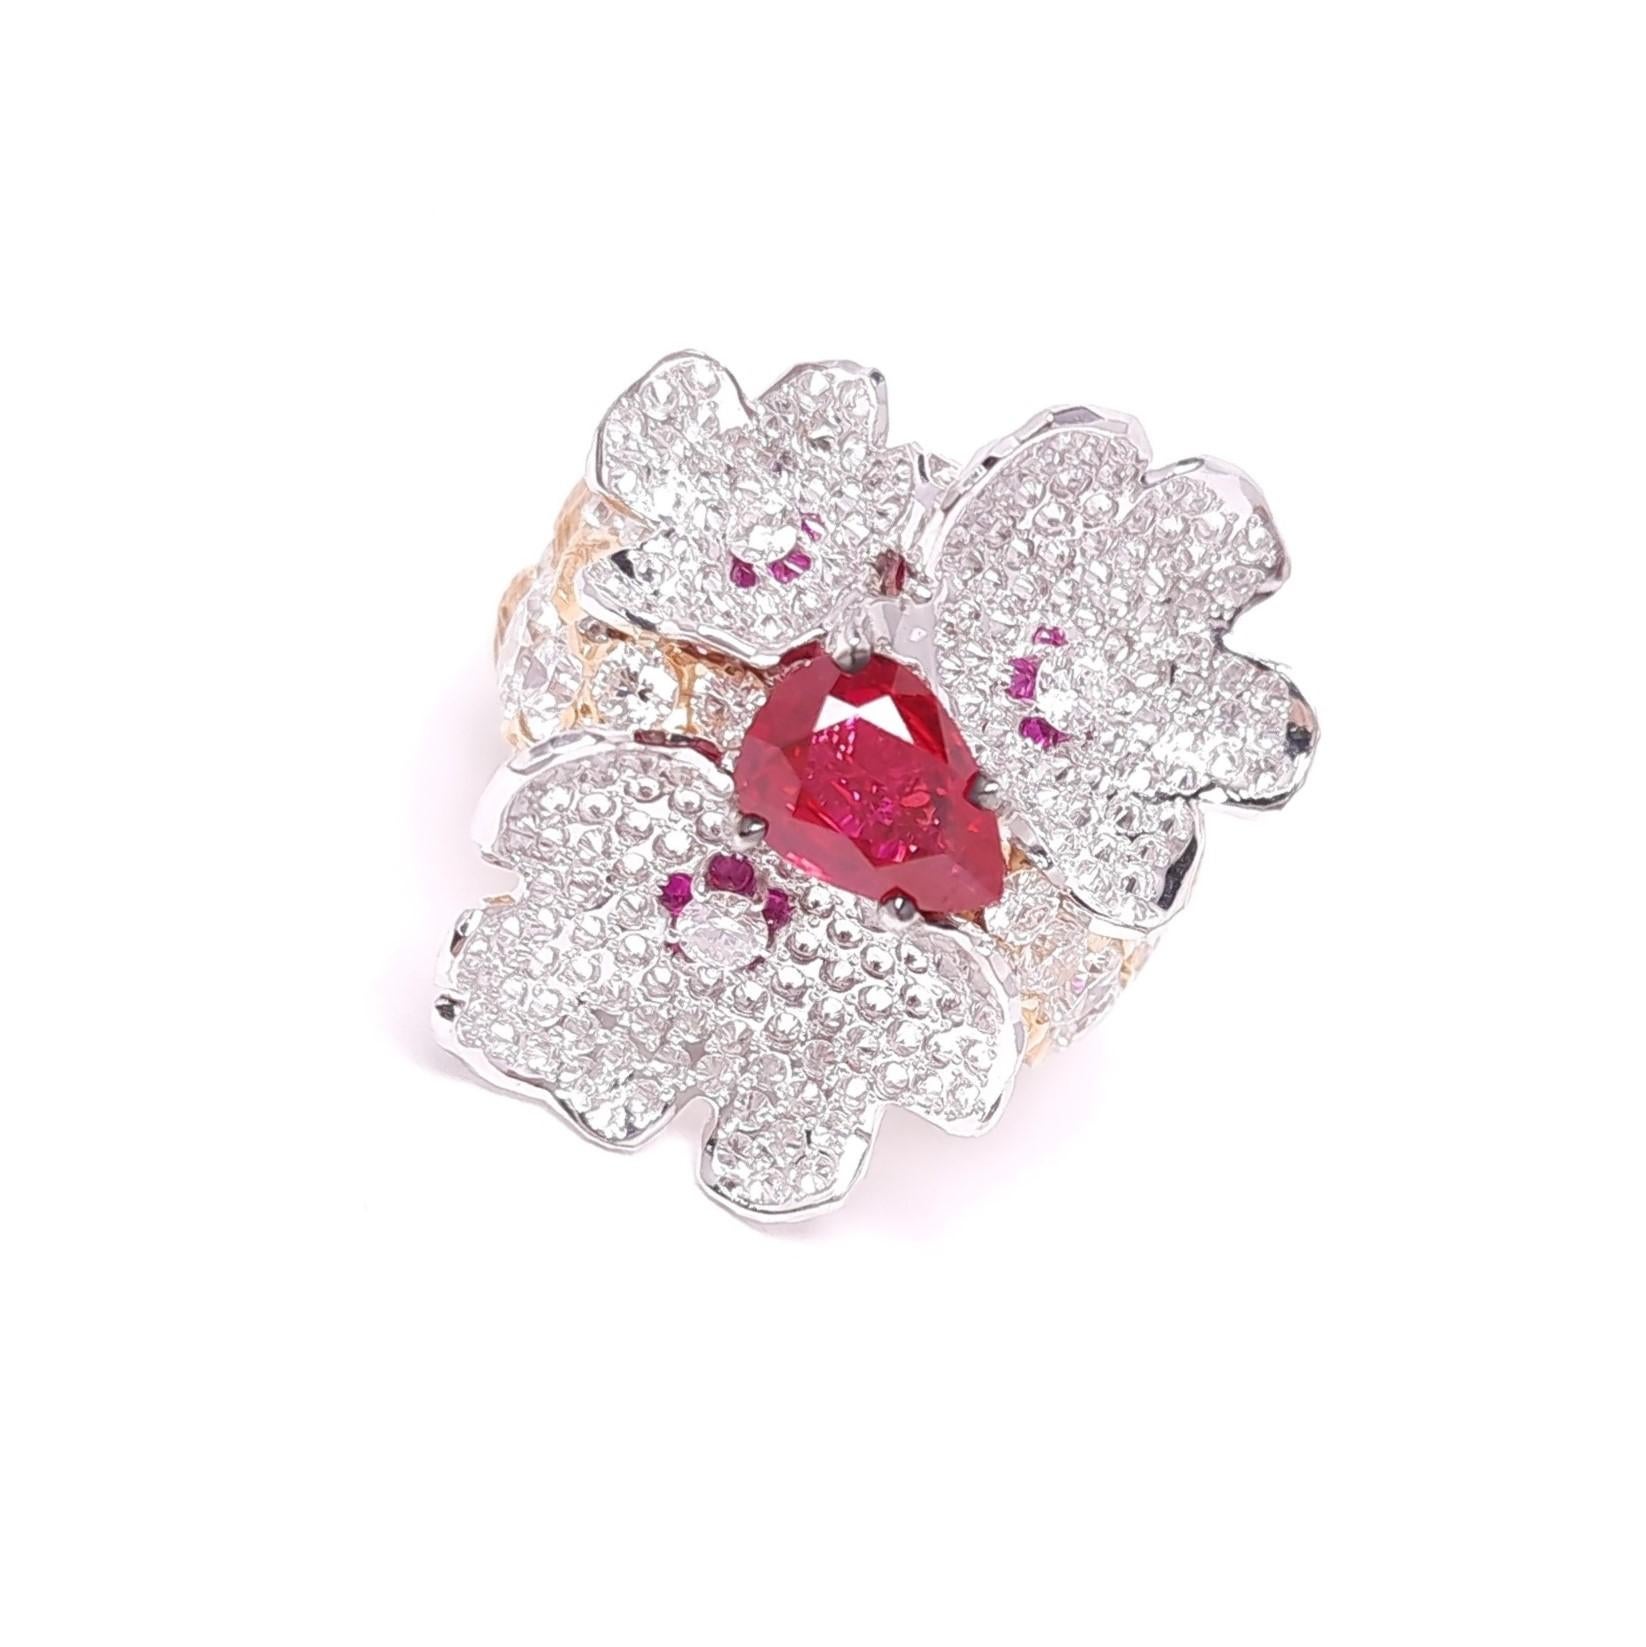 The early flowering almond tree heralds the beginning of spring and new life. Being the symbol of hope, abiding love and friendship, Almond Blossoms Collection by MOISEIKIN is a hymn to the Woman’s Beauty. 

This gorgeous ring consists of 2.9ct